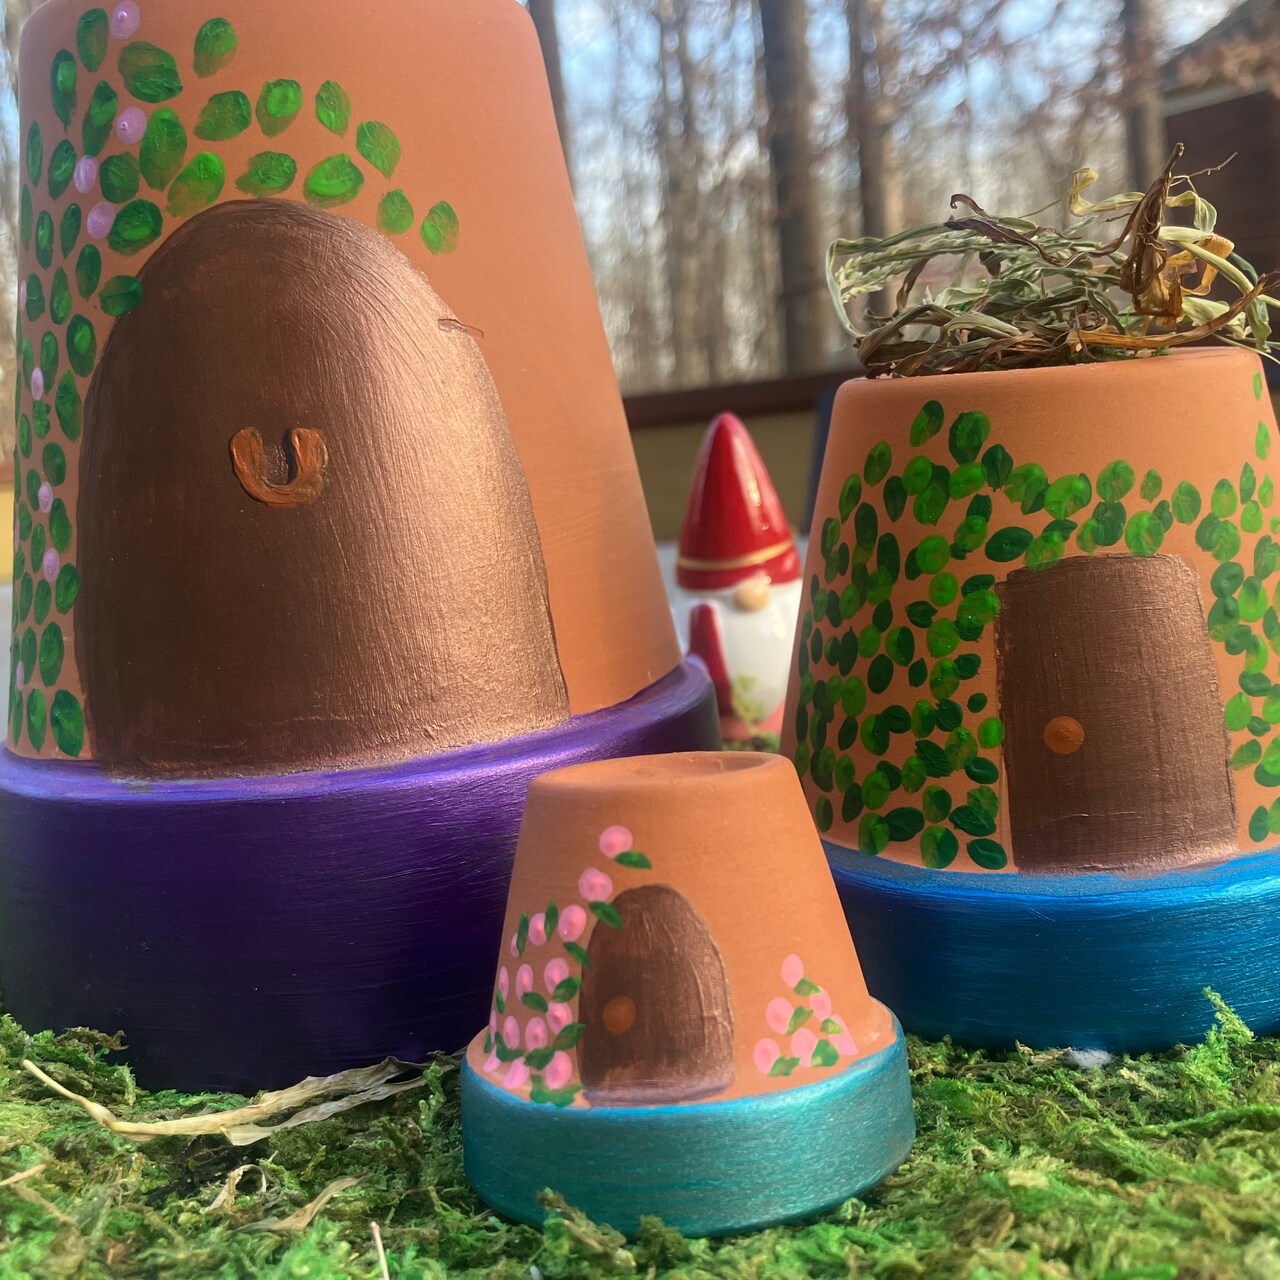 Kids Club: Fairy Garden and Gnome Houses